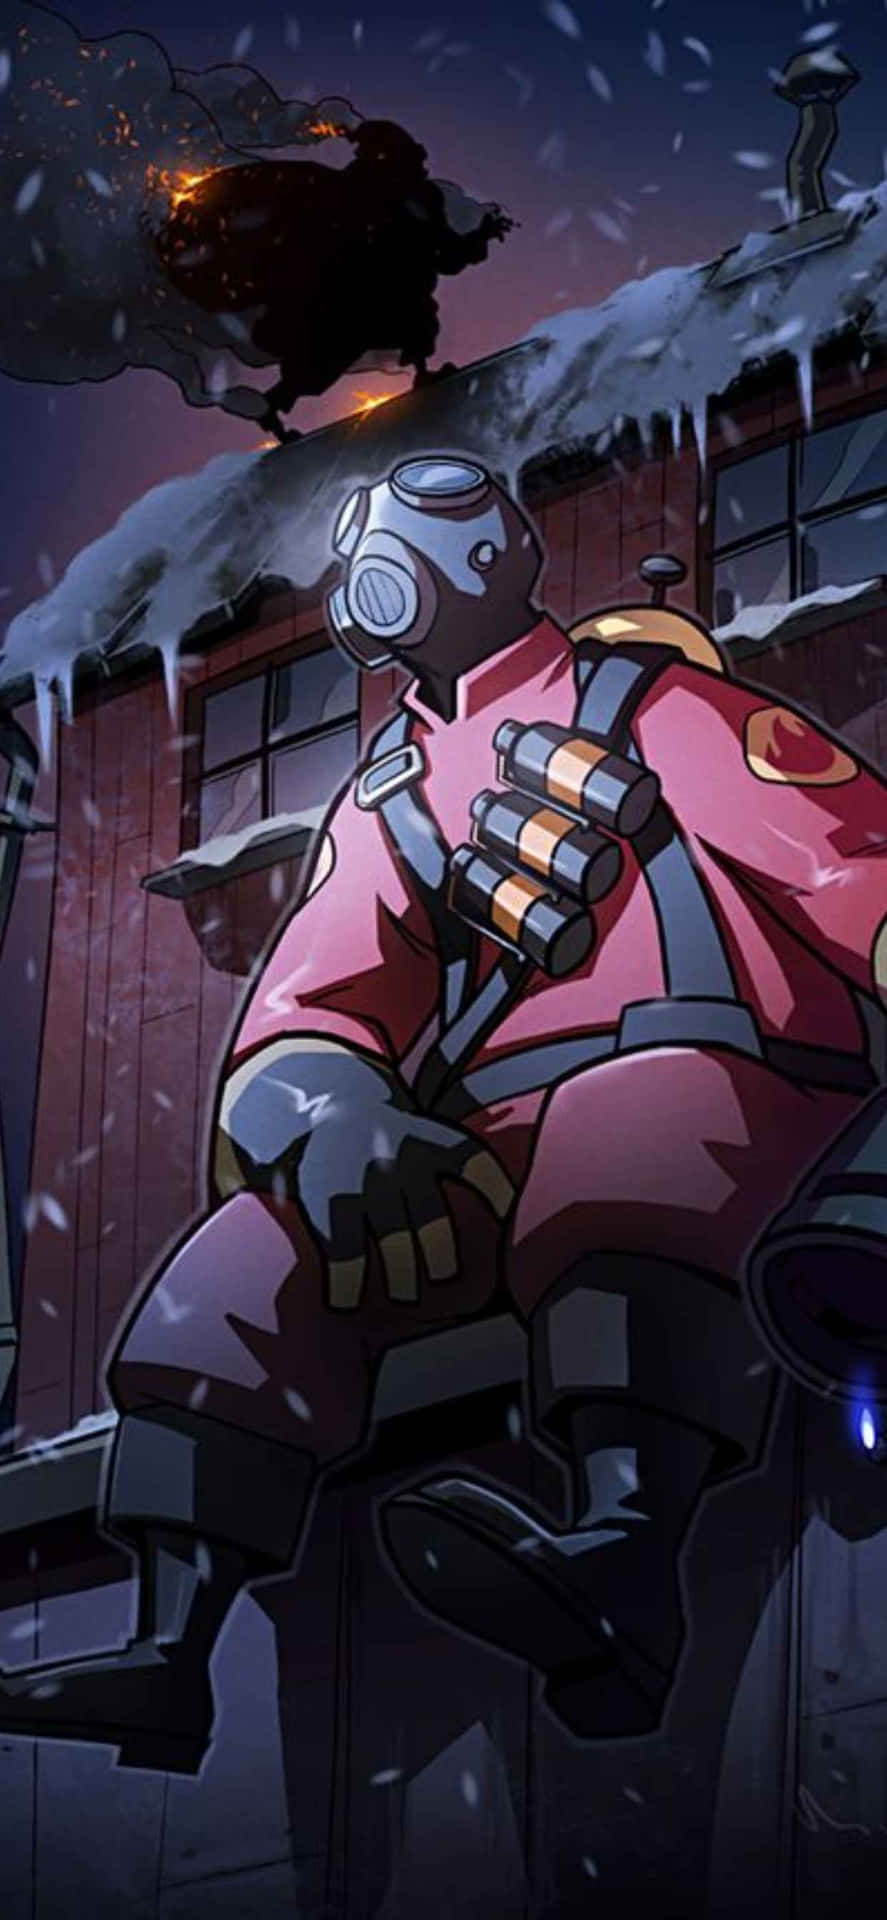 Animated Team Fortress 2 Background on iPhone XS Max